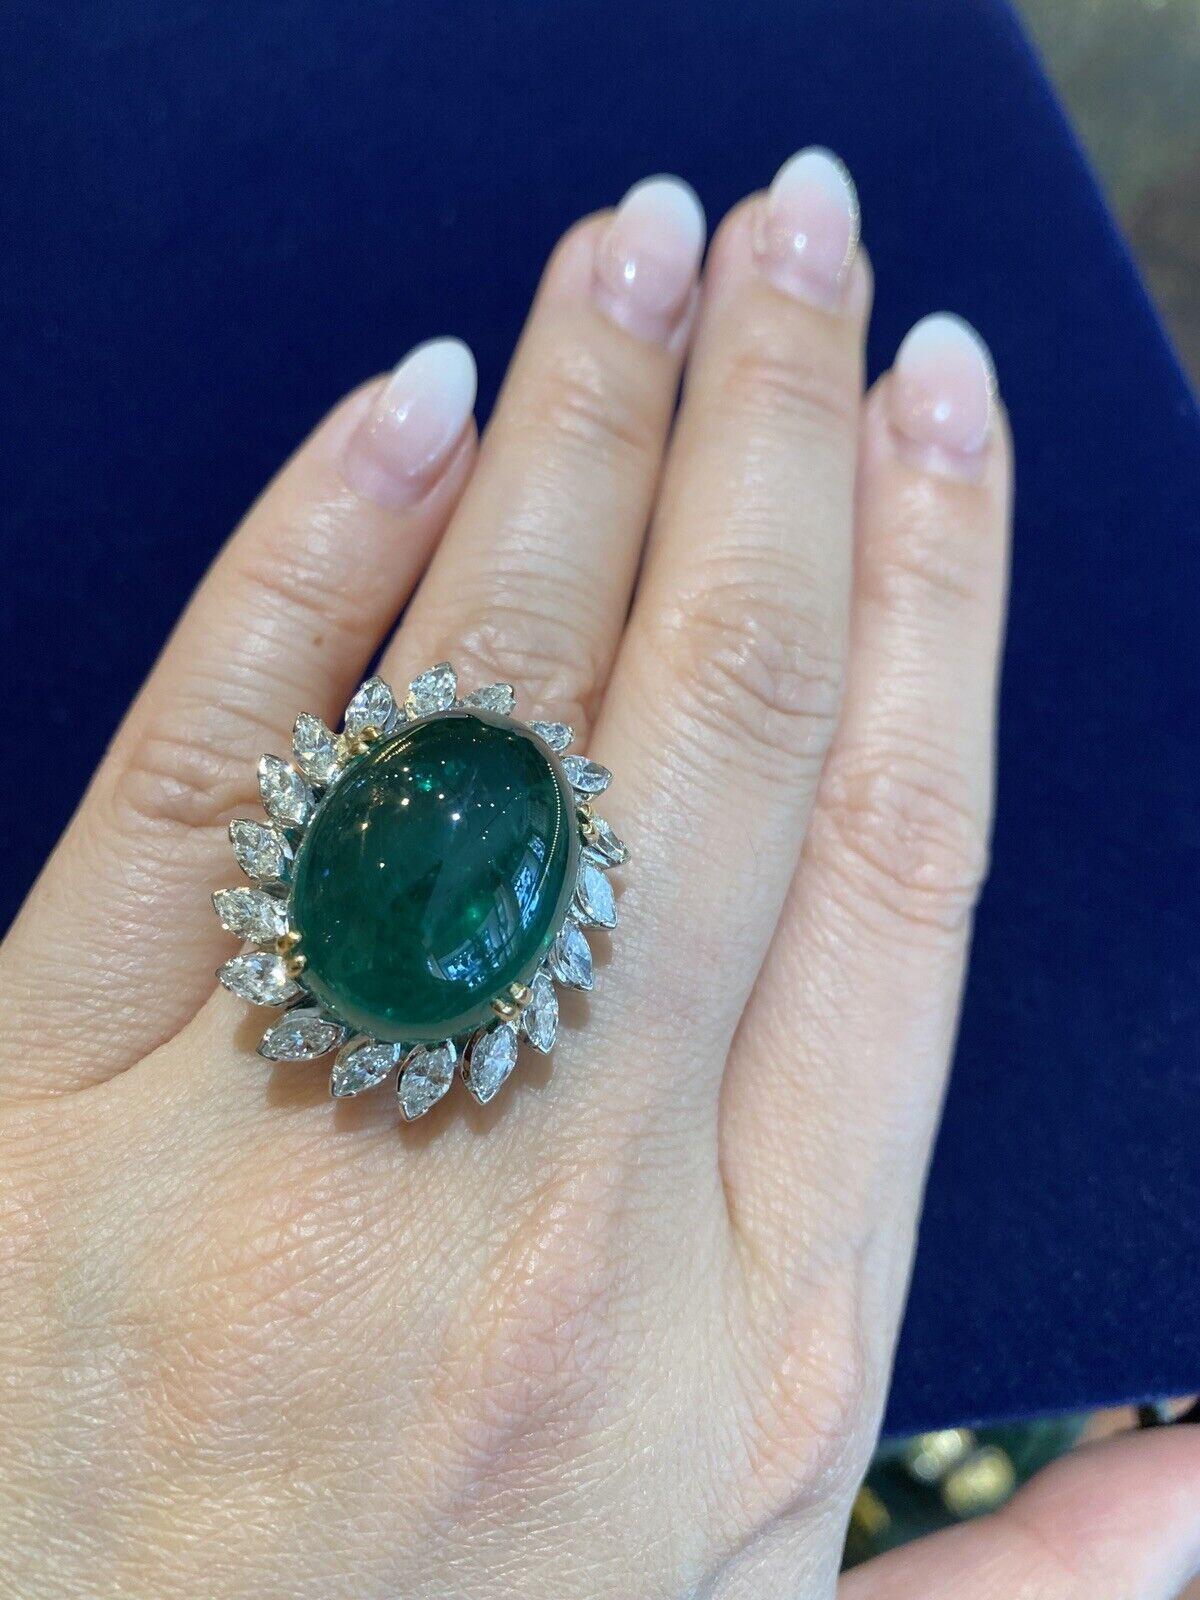 Emerald and Diamond Ring in Platinum
featuring
an Oval Cabochon Emerald
weighing 29.20 carats
GIA certified
Zambia Origin
F2 clarity enhancement

Platinum setting
with 18 Marquise Diamonds
weighing 3.00 carats estimated

Ring size is 6.75
Ring top